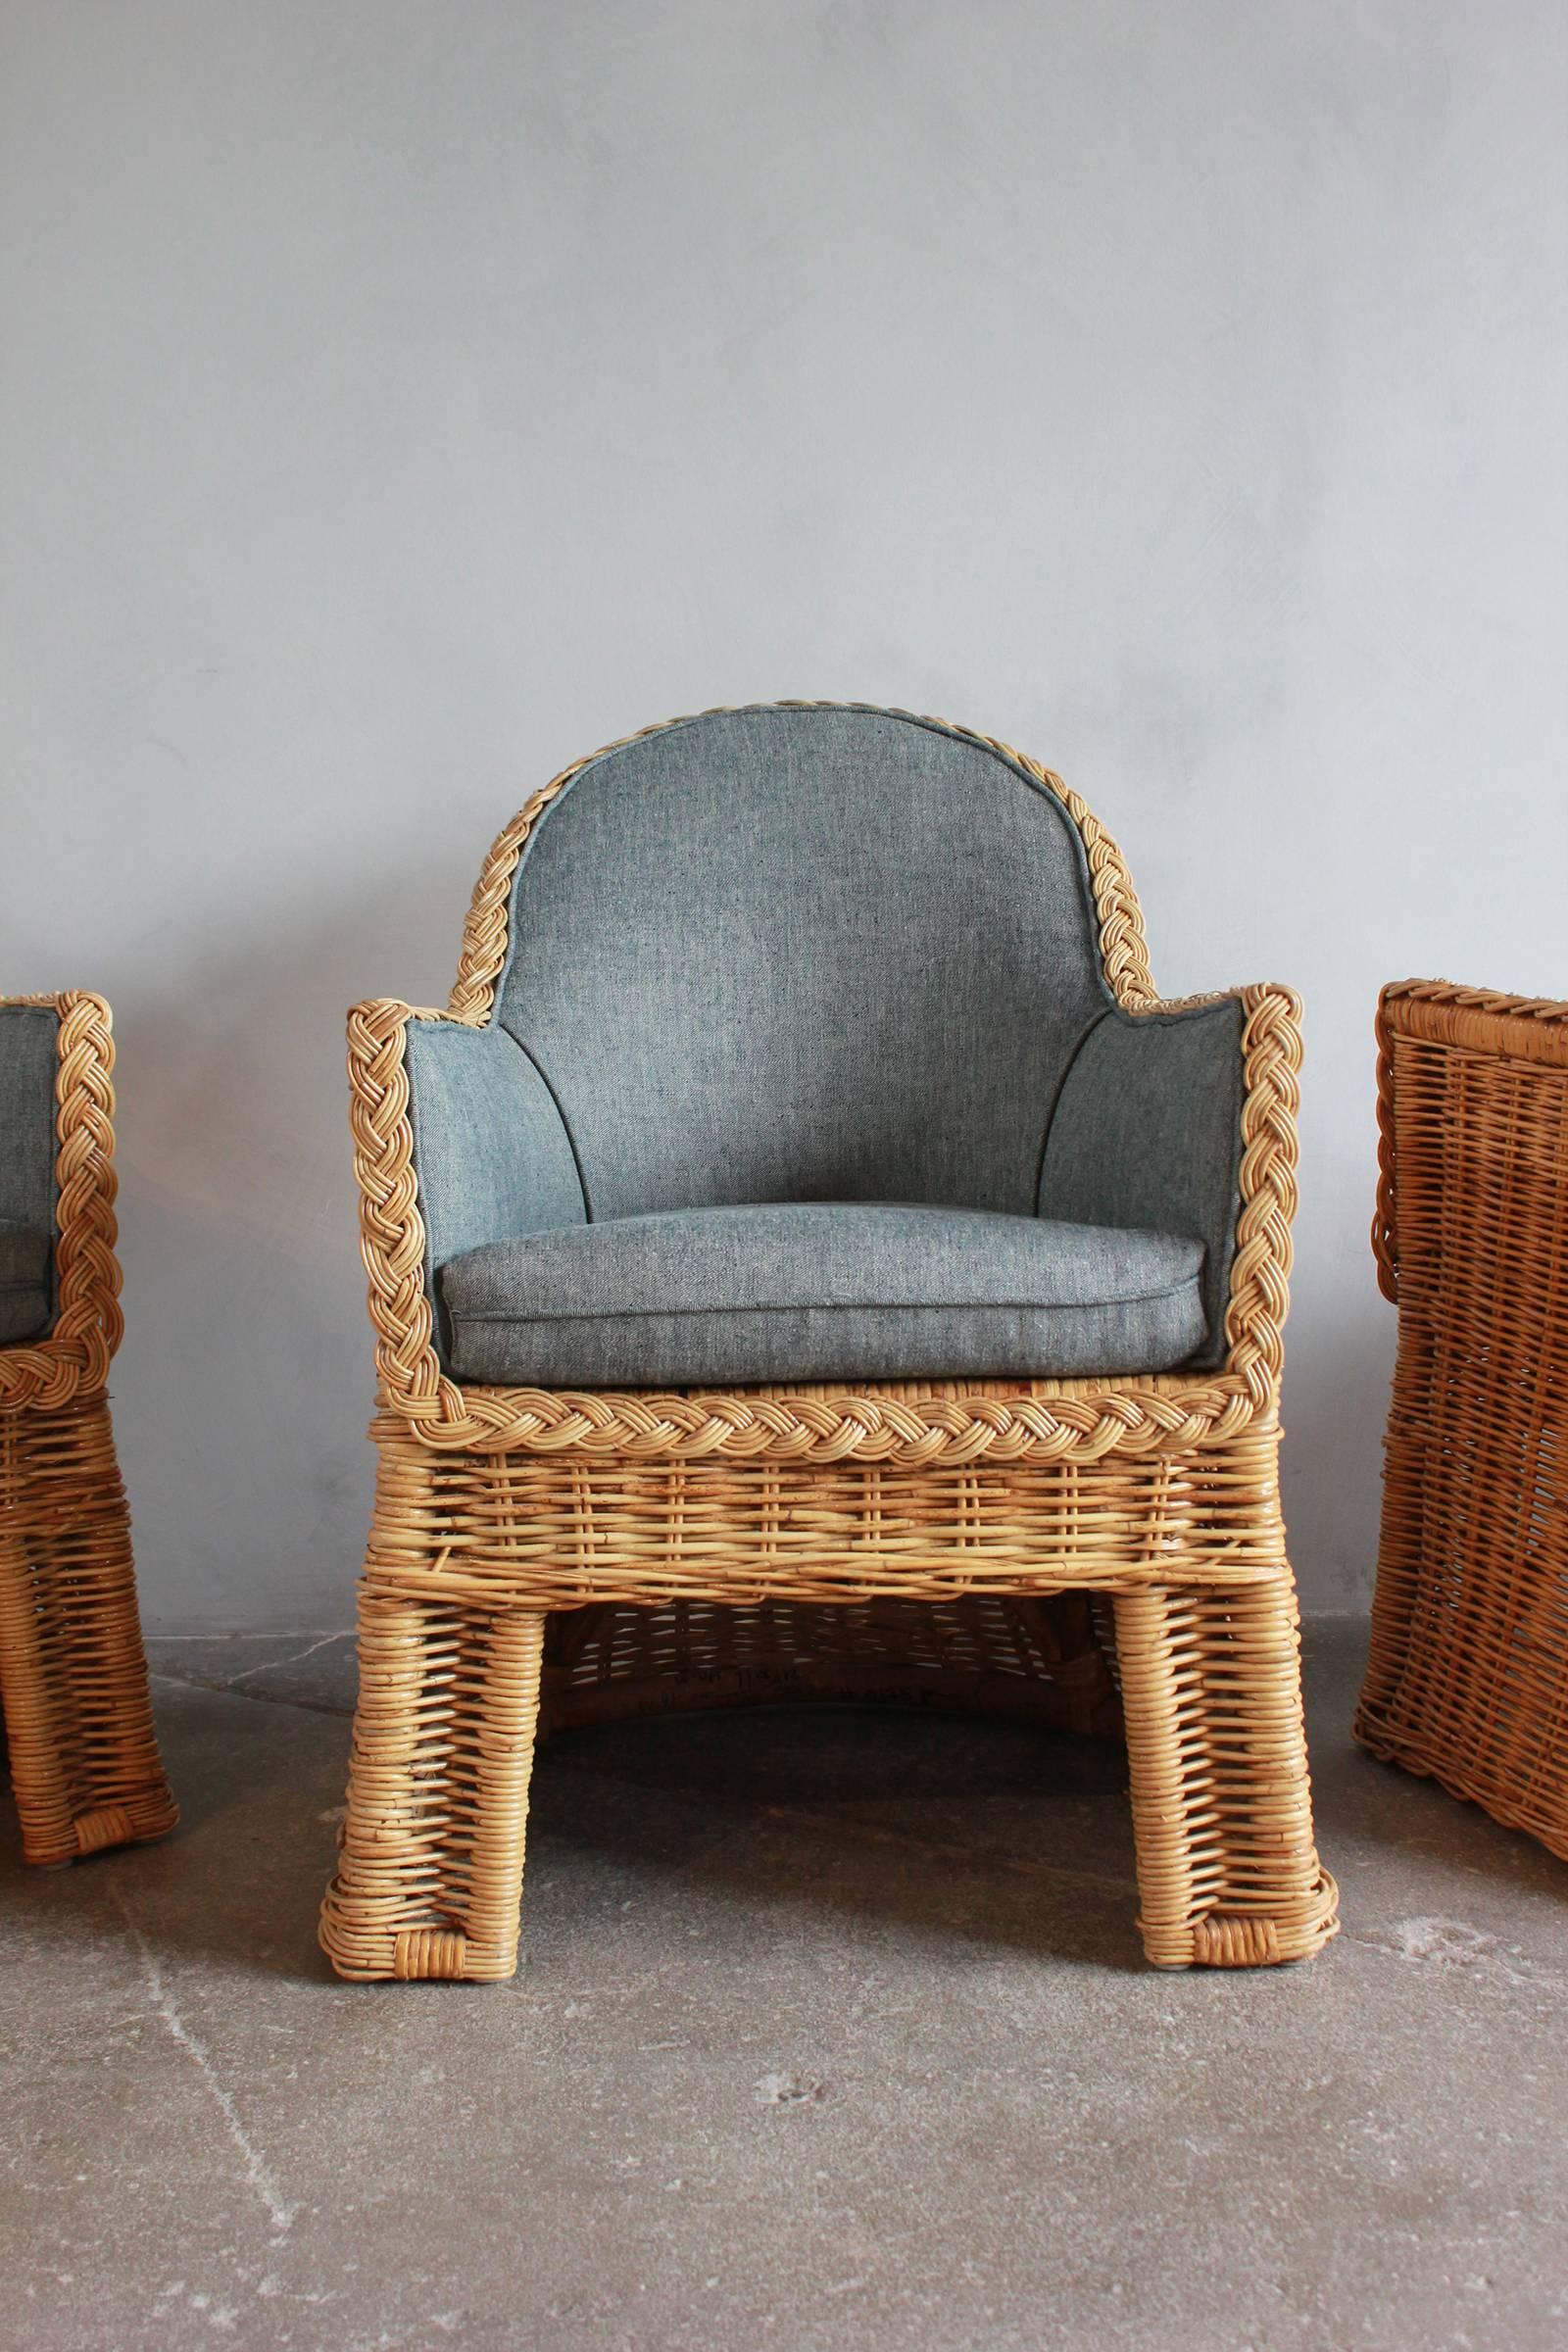 Set of four oversized wicker dining chairs upholstered in reverse denim.